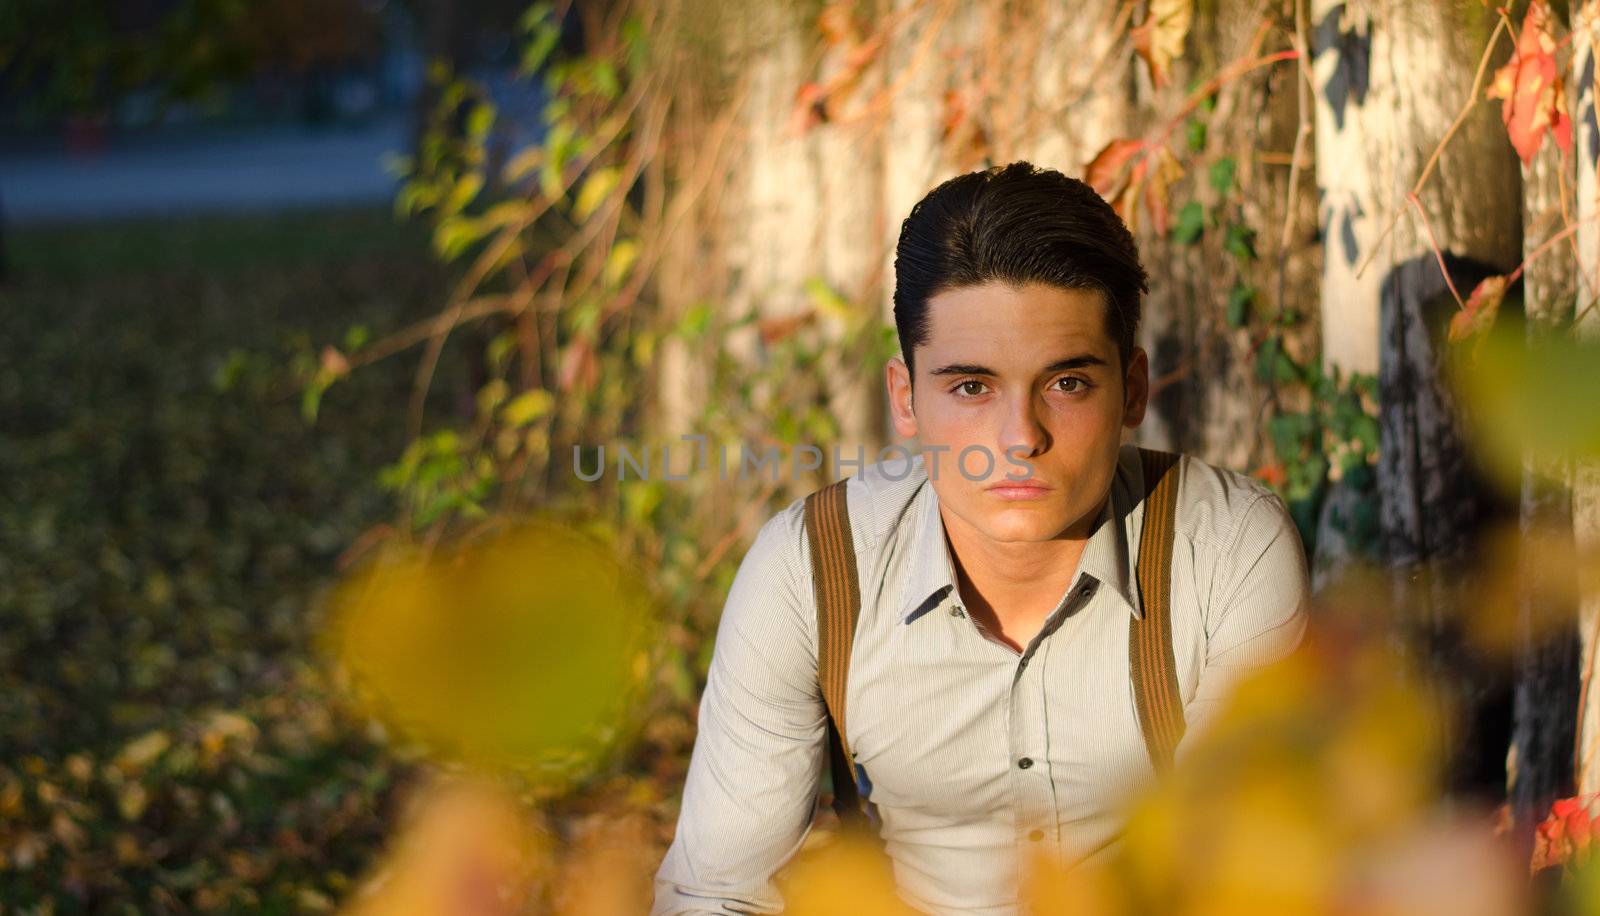 Handsome young man  in fall (autumn) near wooden fence by artofphoto